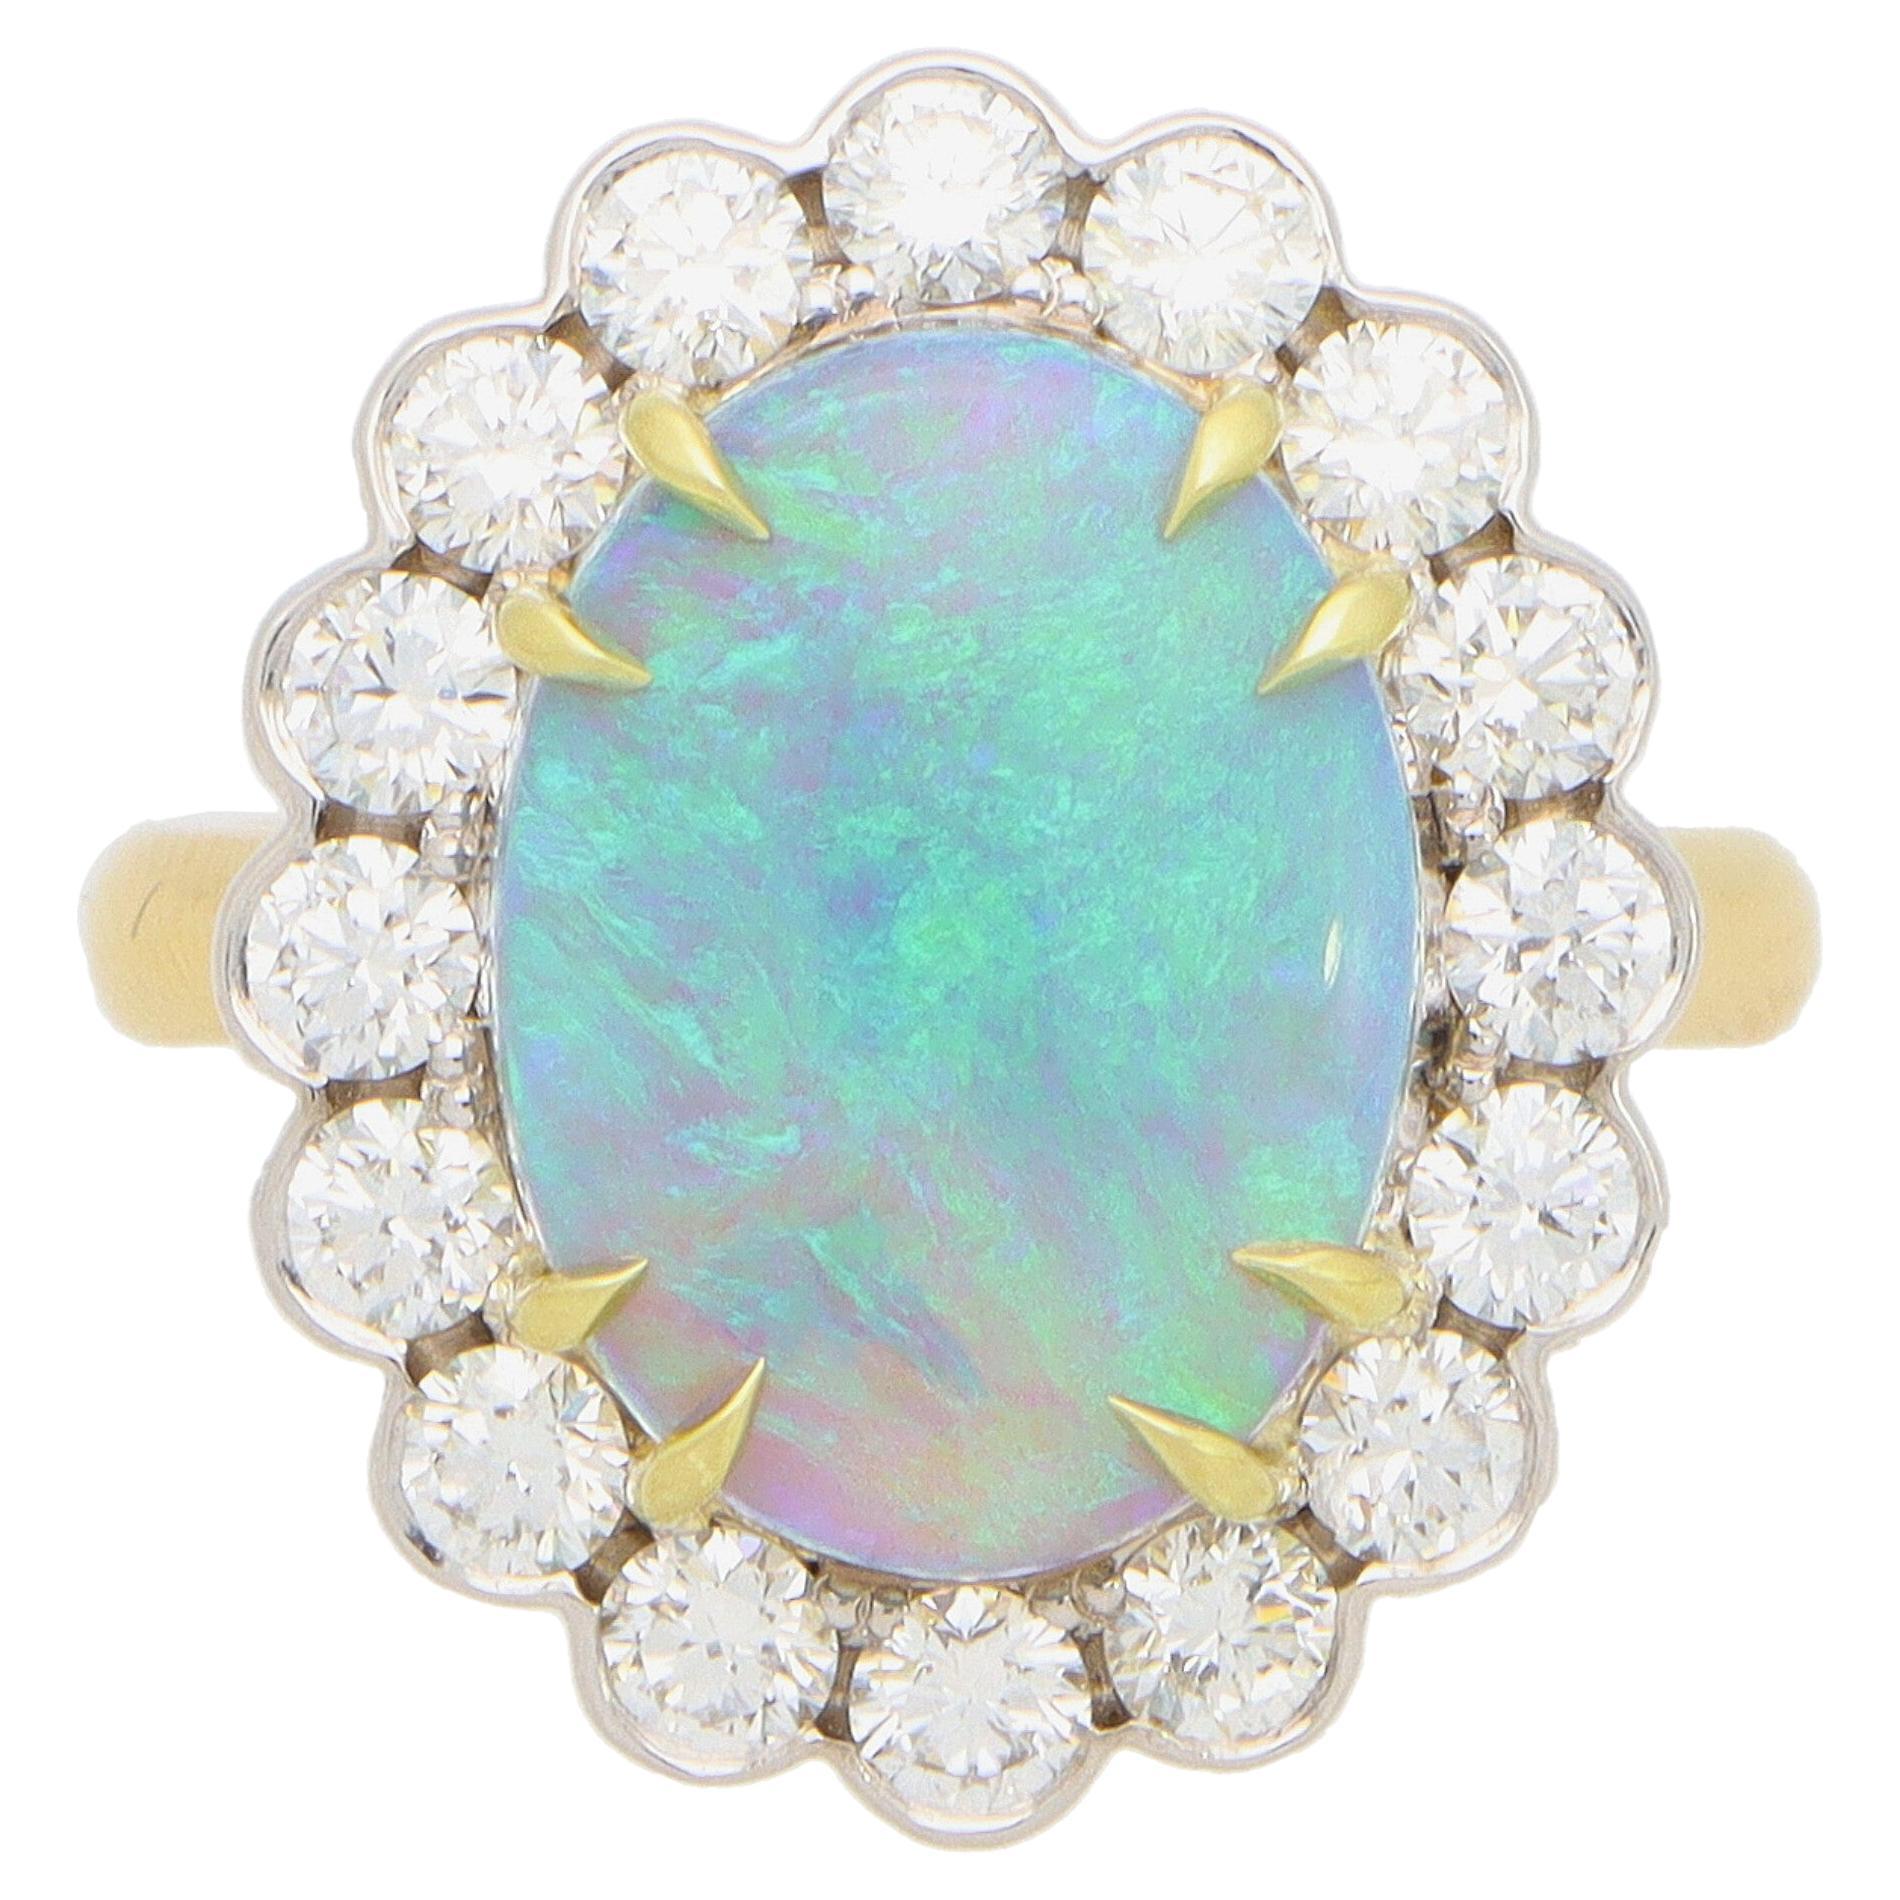 Contemporary Opal and Diamond Cluster Ring Set in 18k Yellow and White Gold